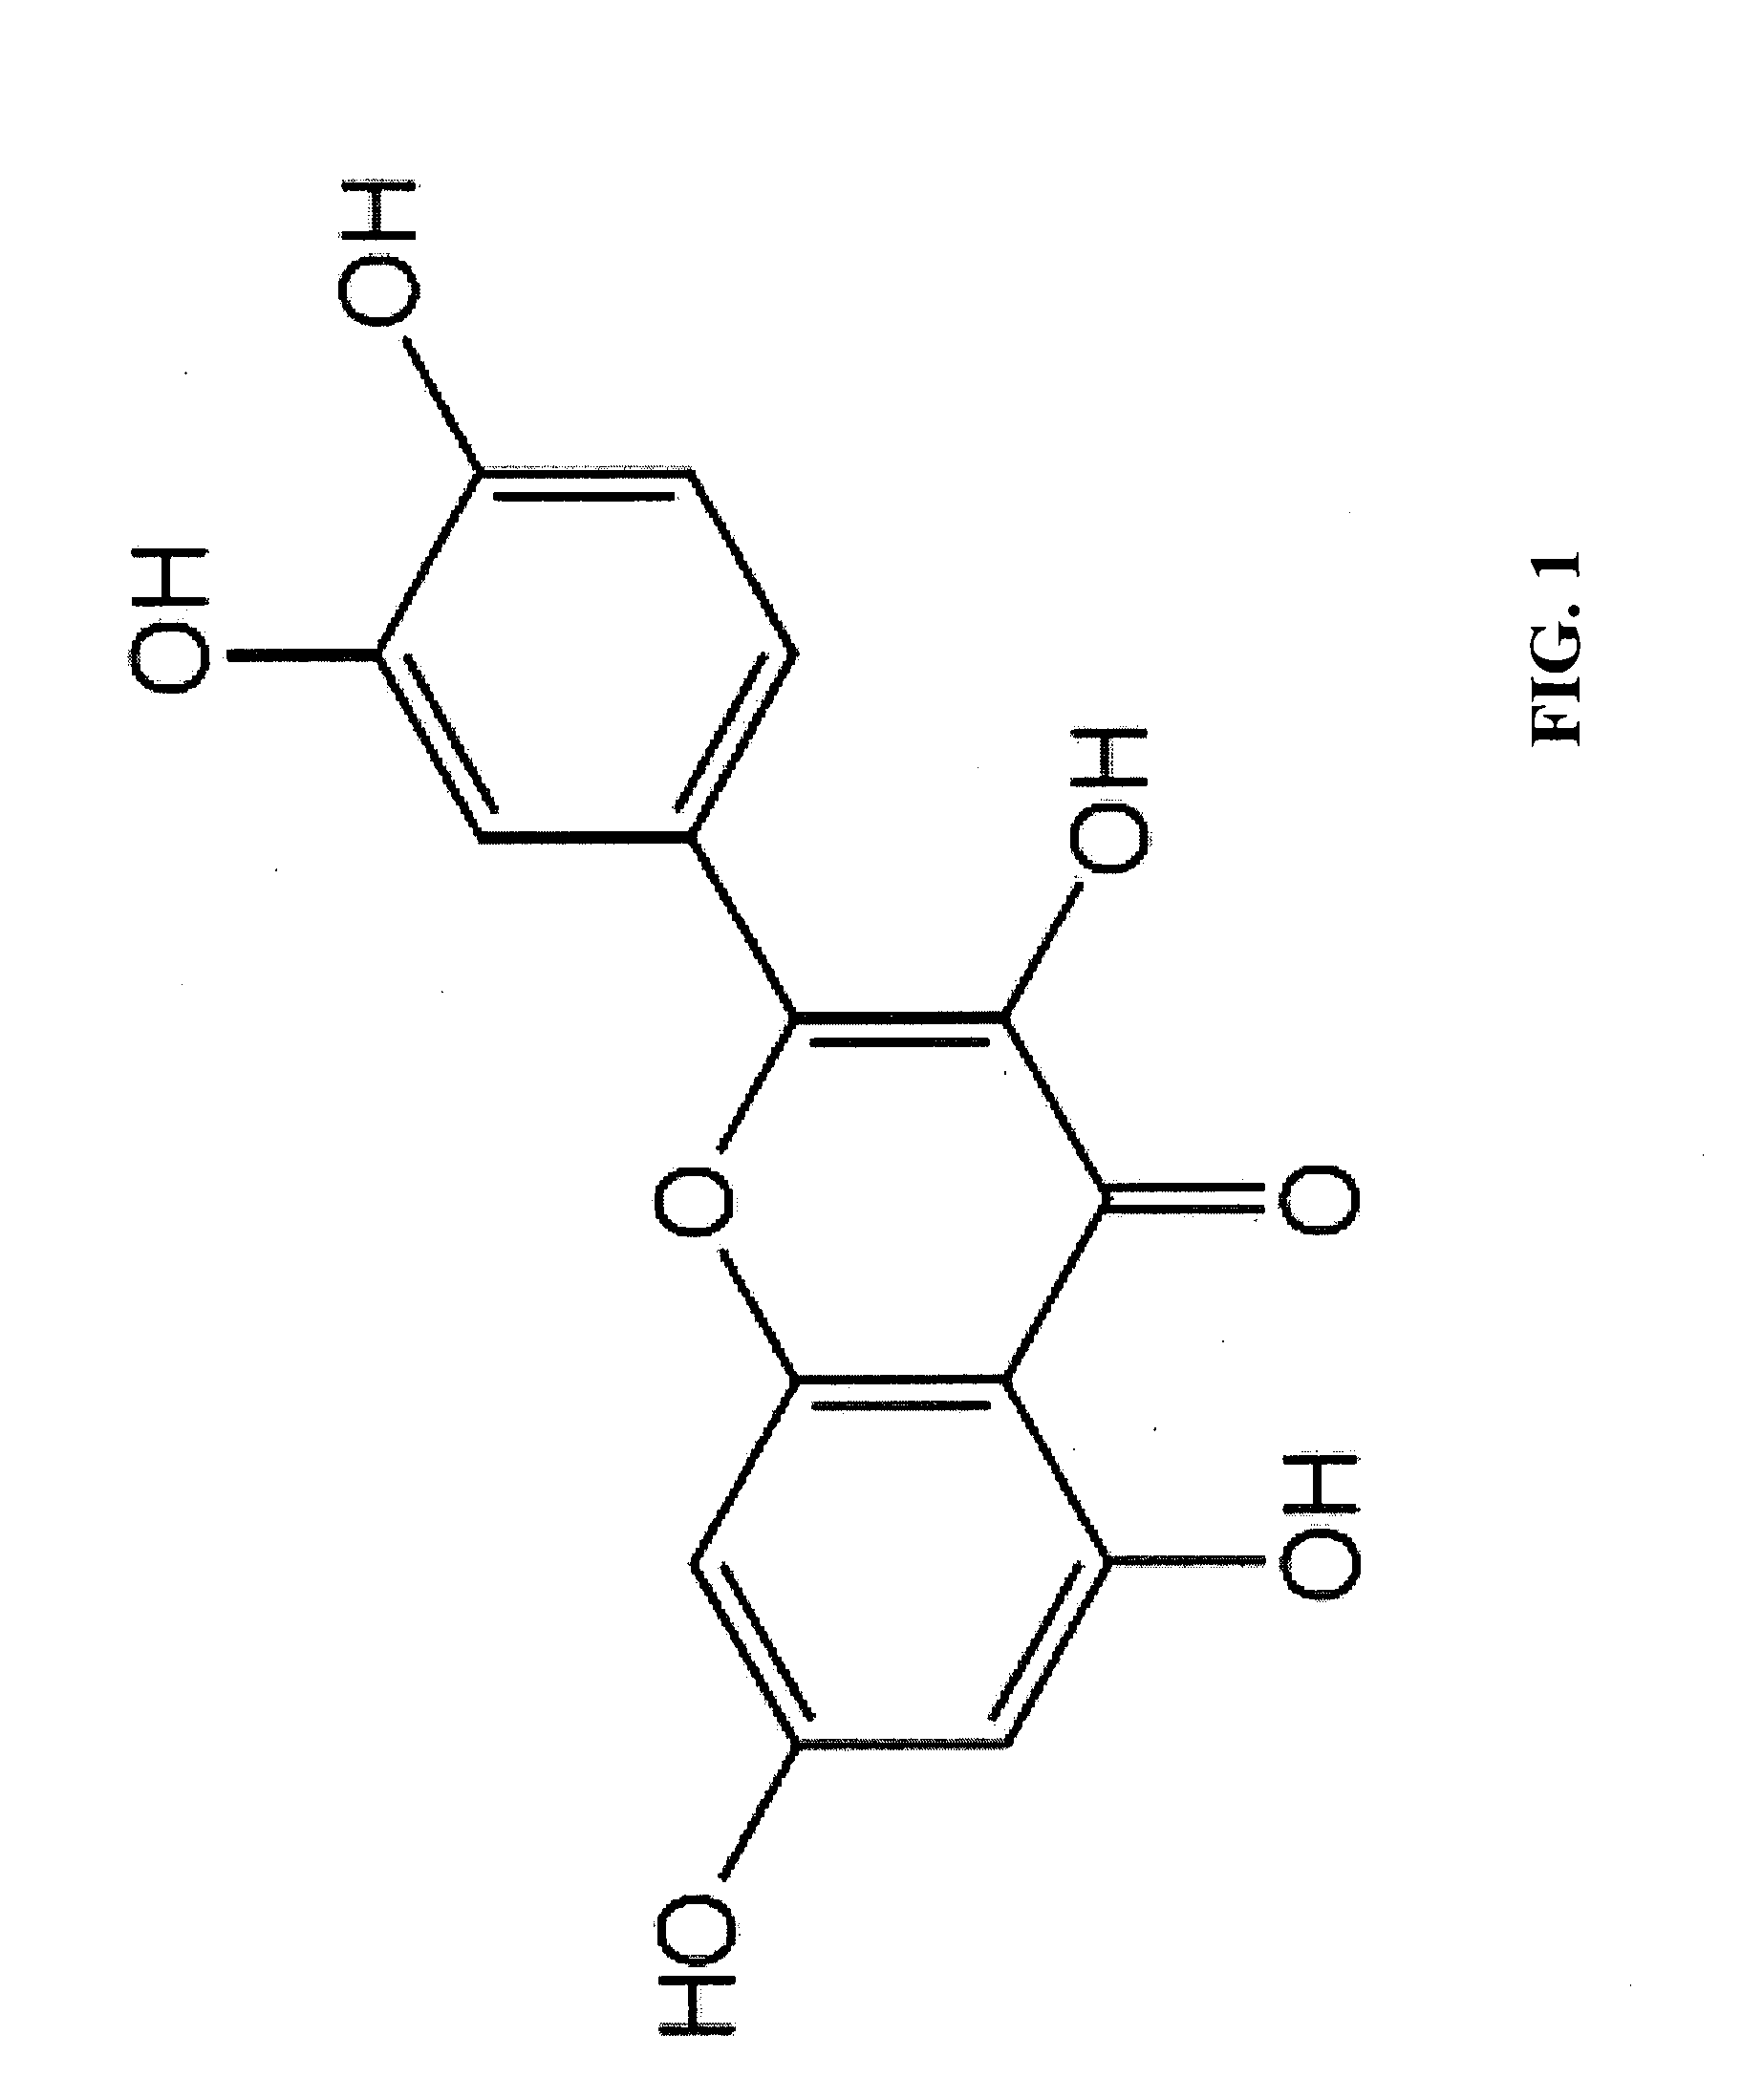 Acne treatment compositions and methods of use